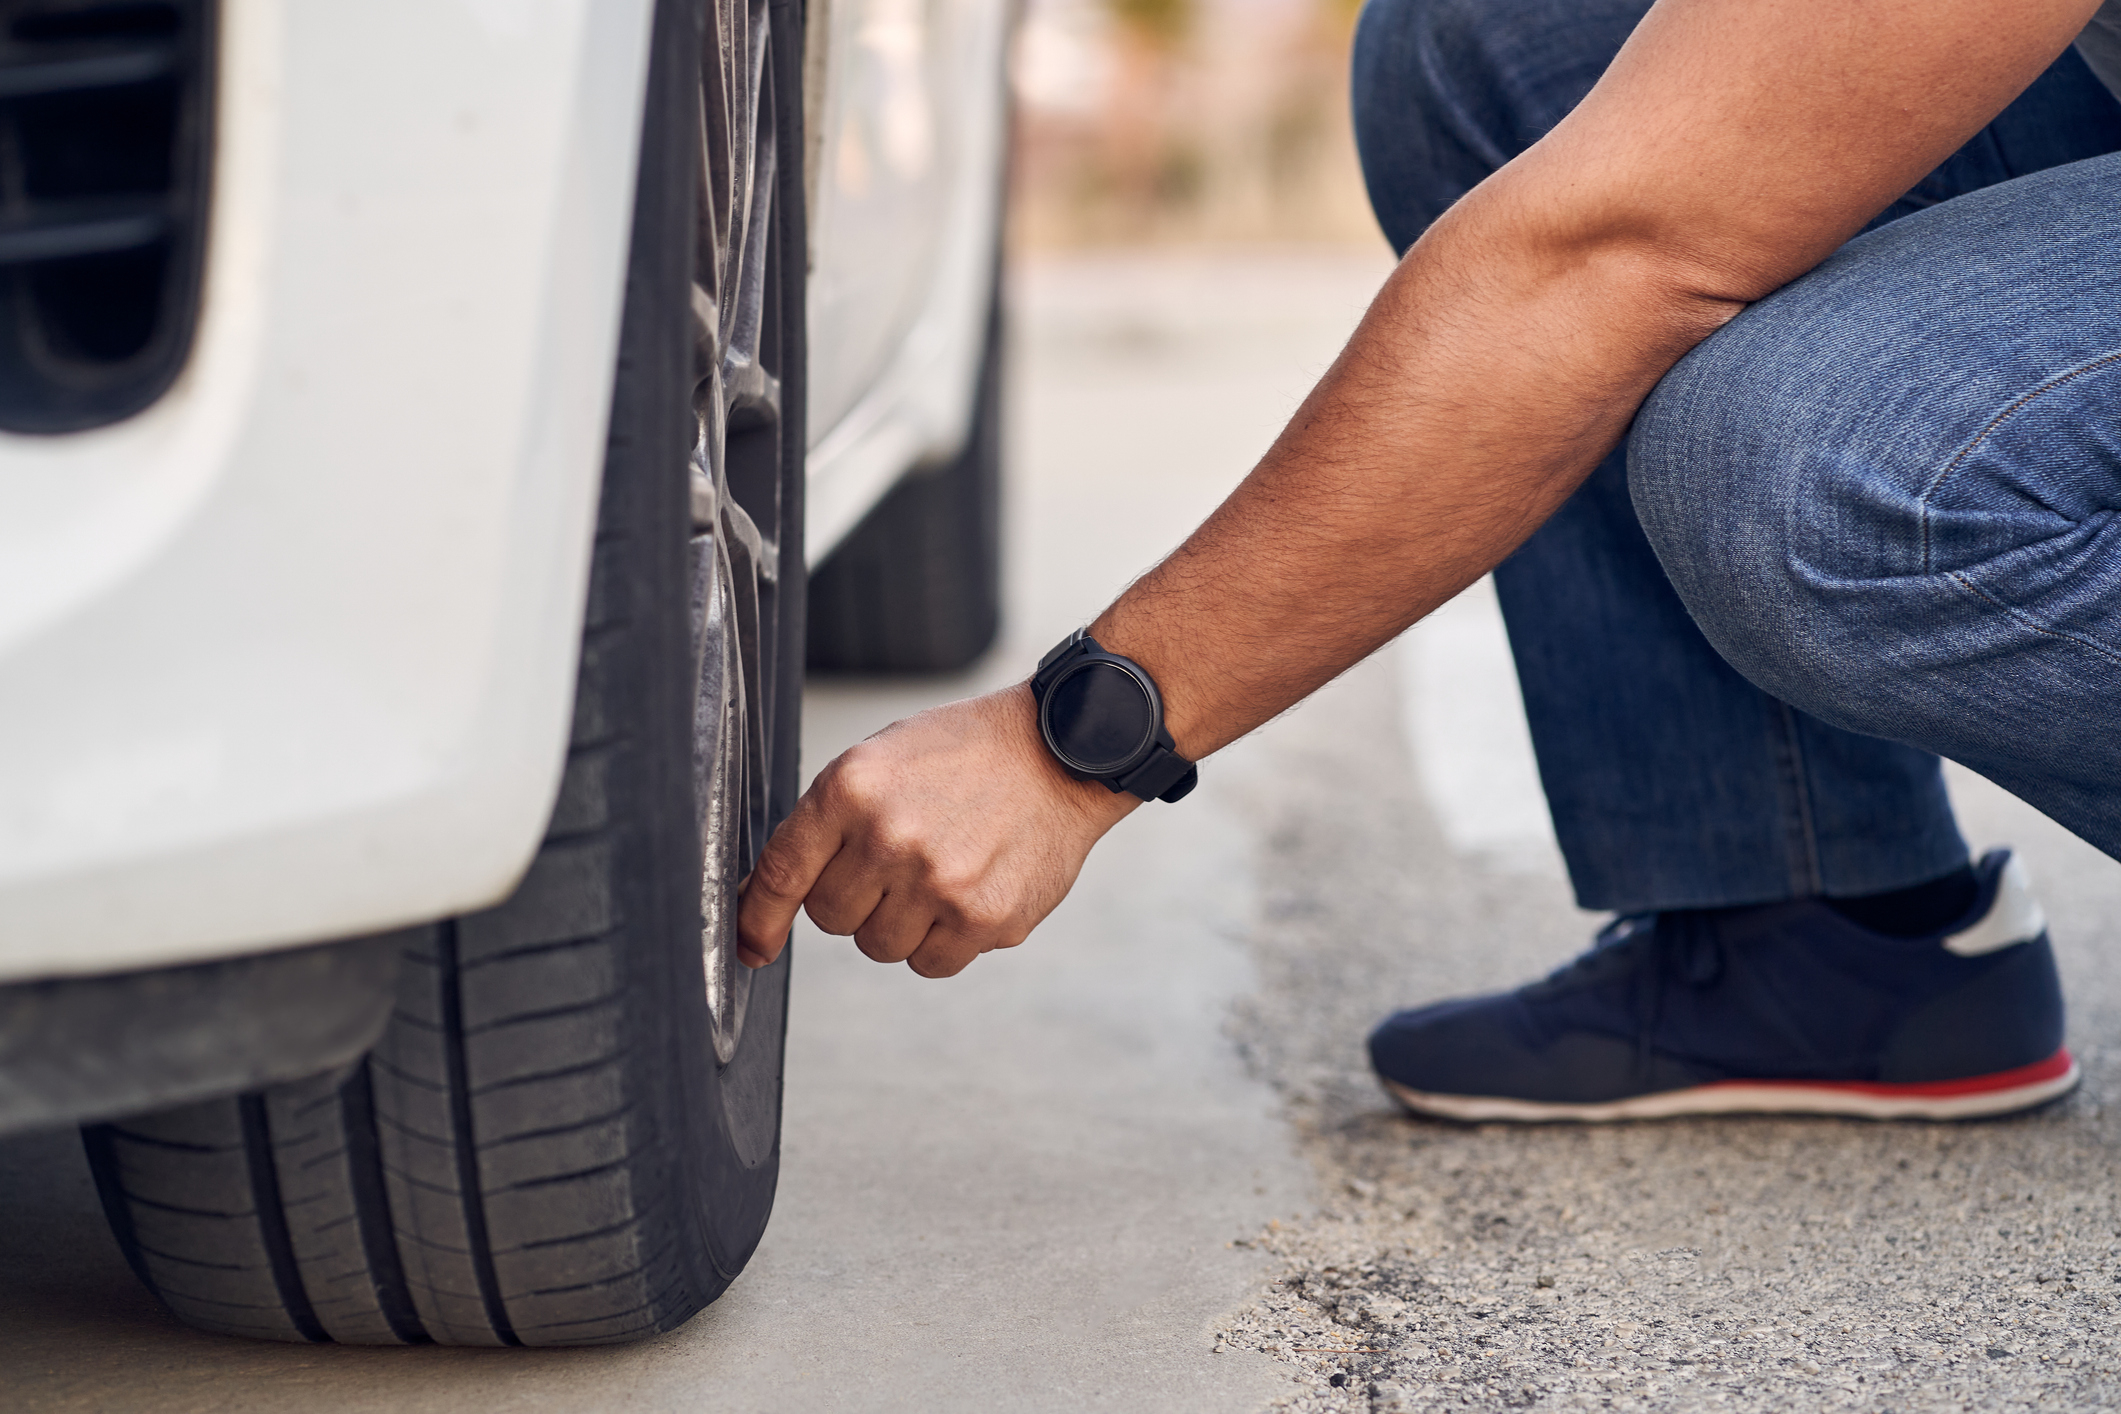 A person in casual clothing examines the tread on a tire of a parked car